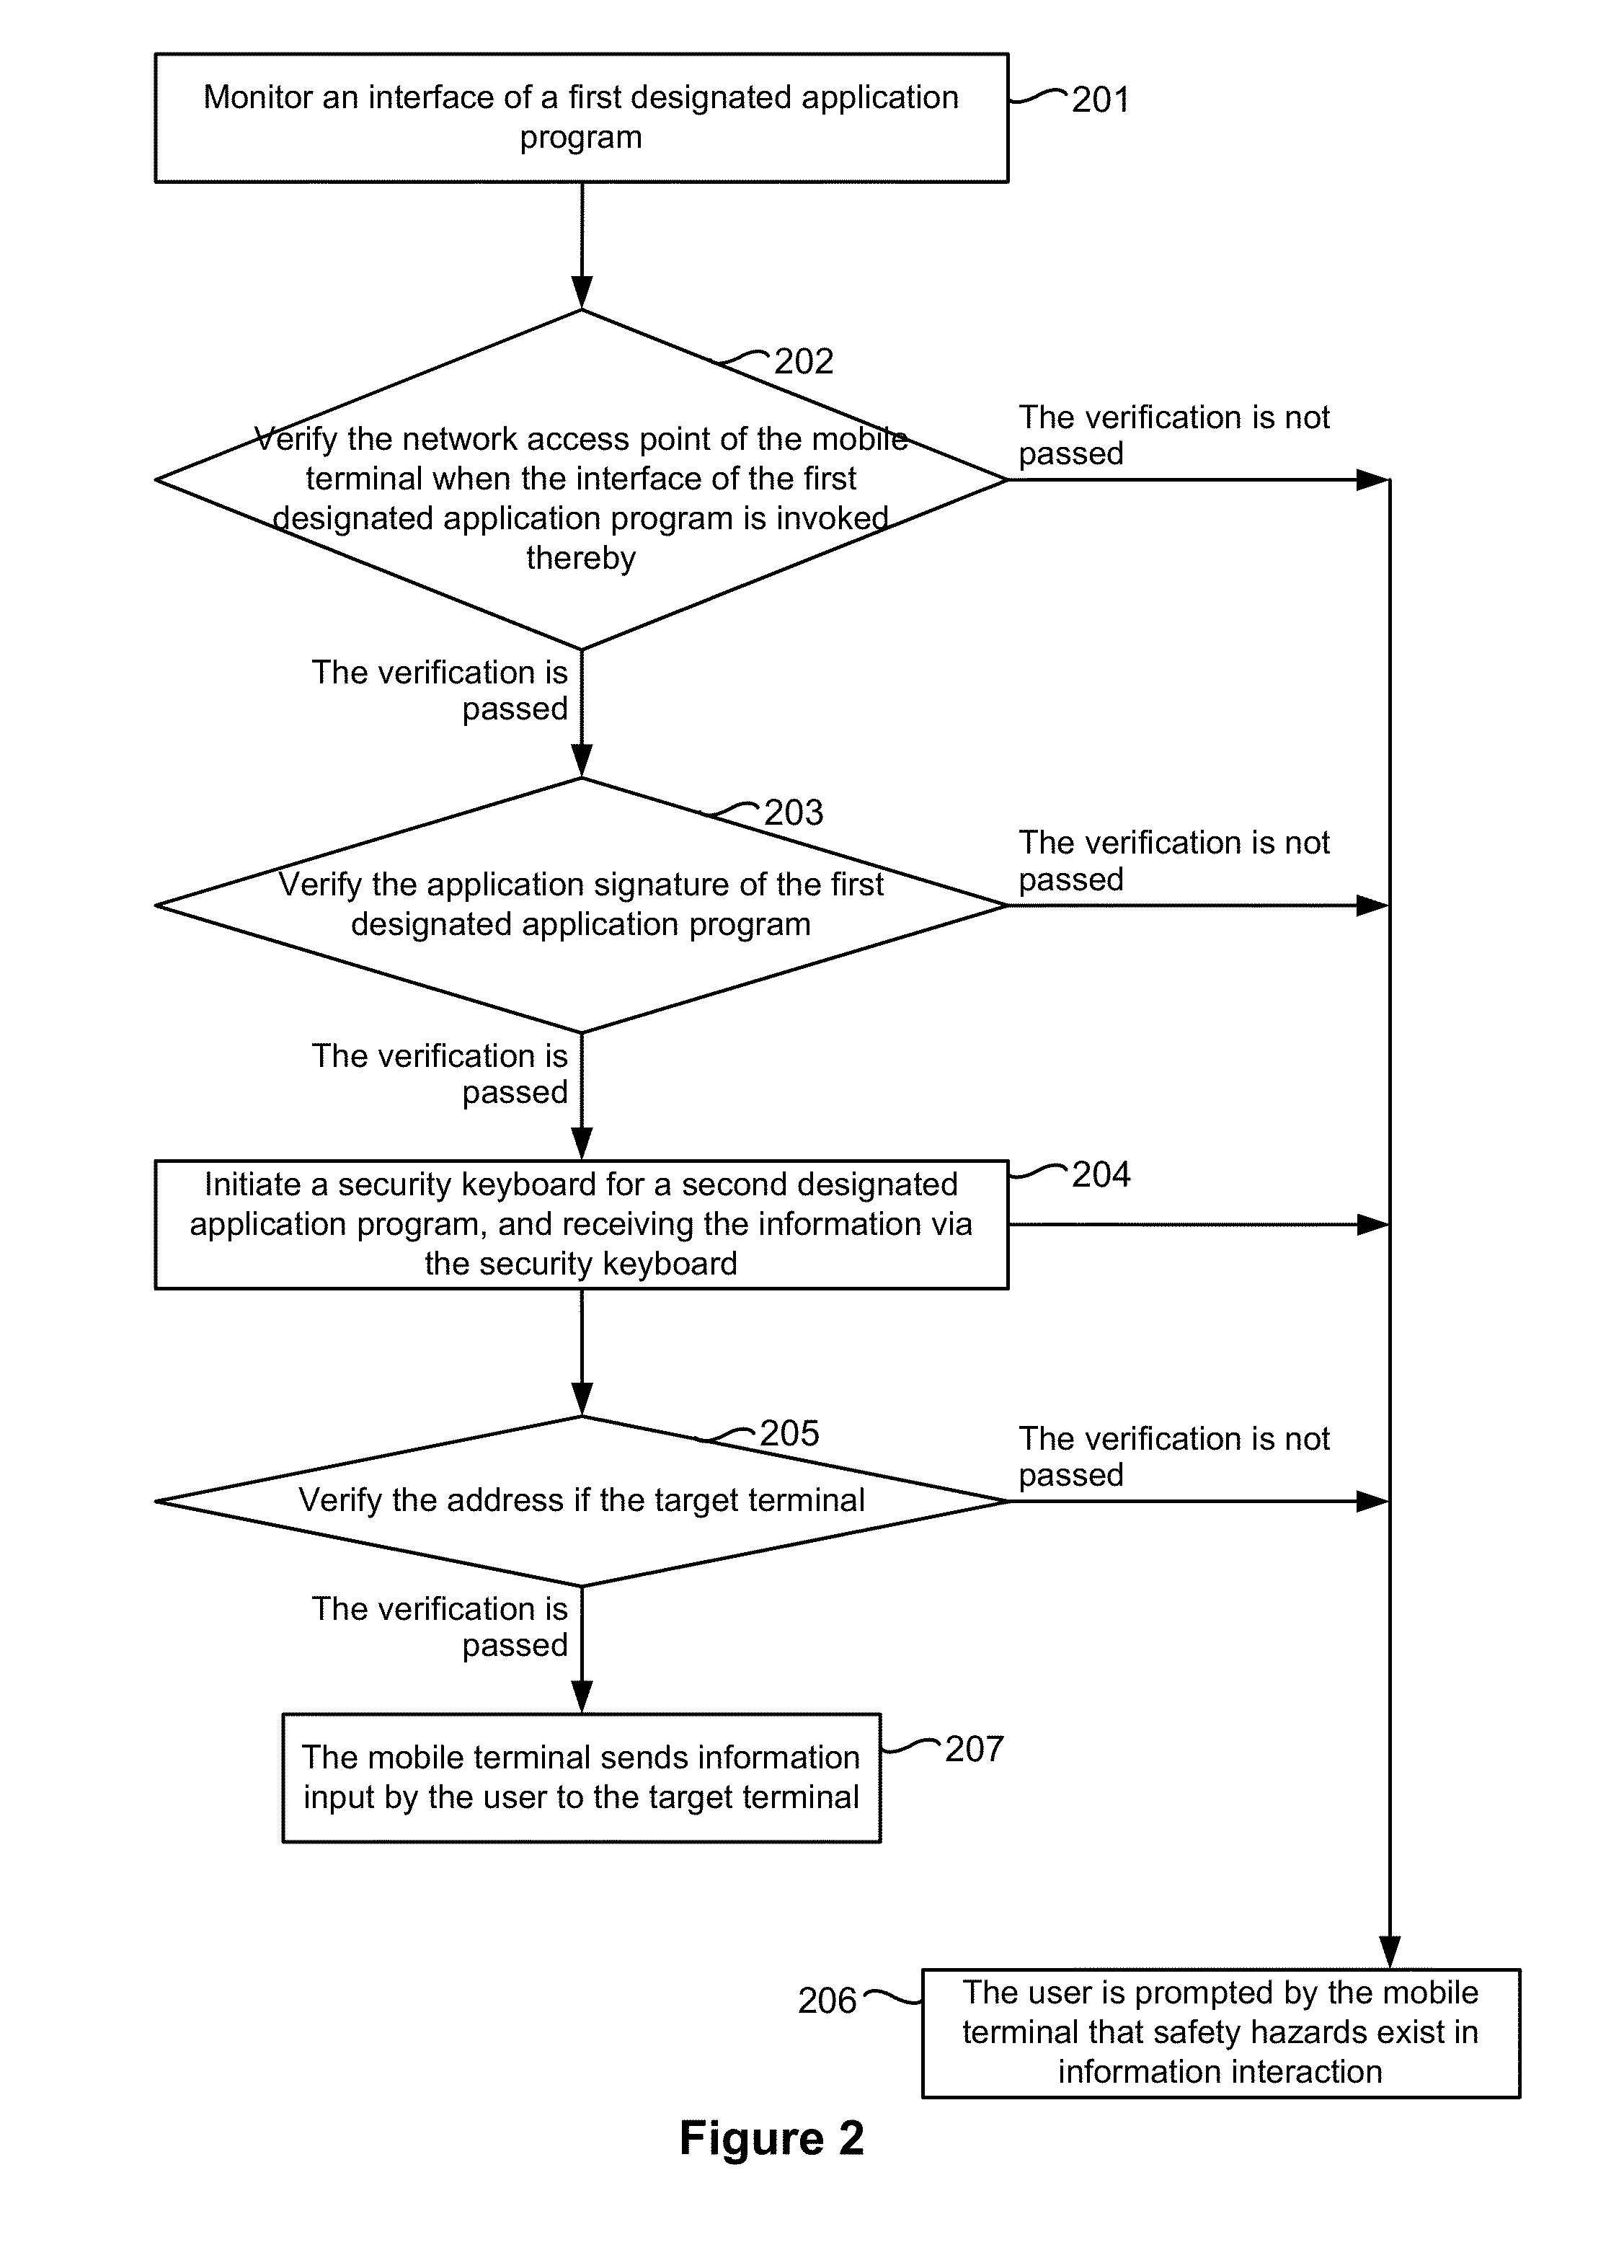 Method and device for securing an information interaction process